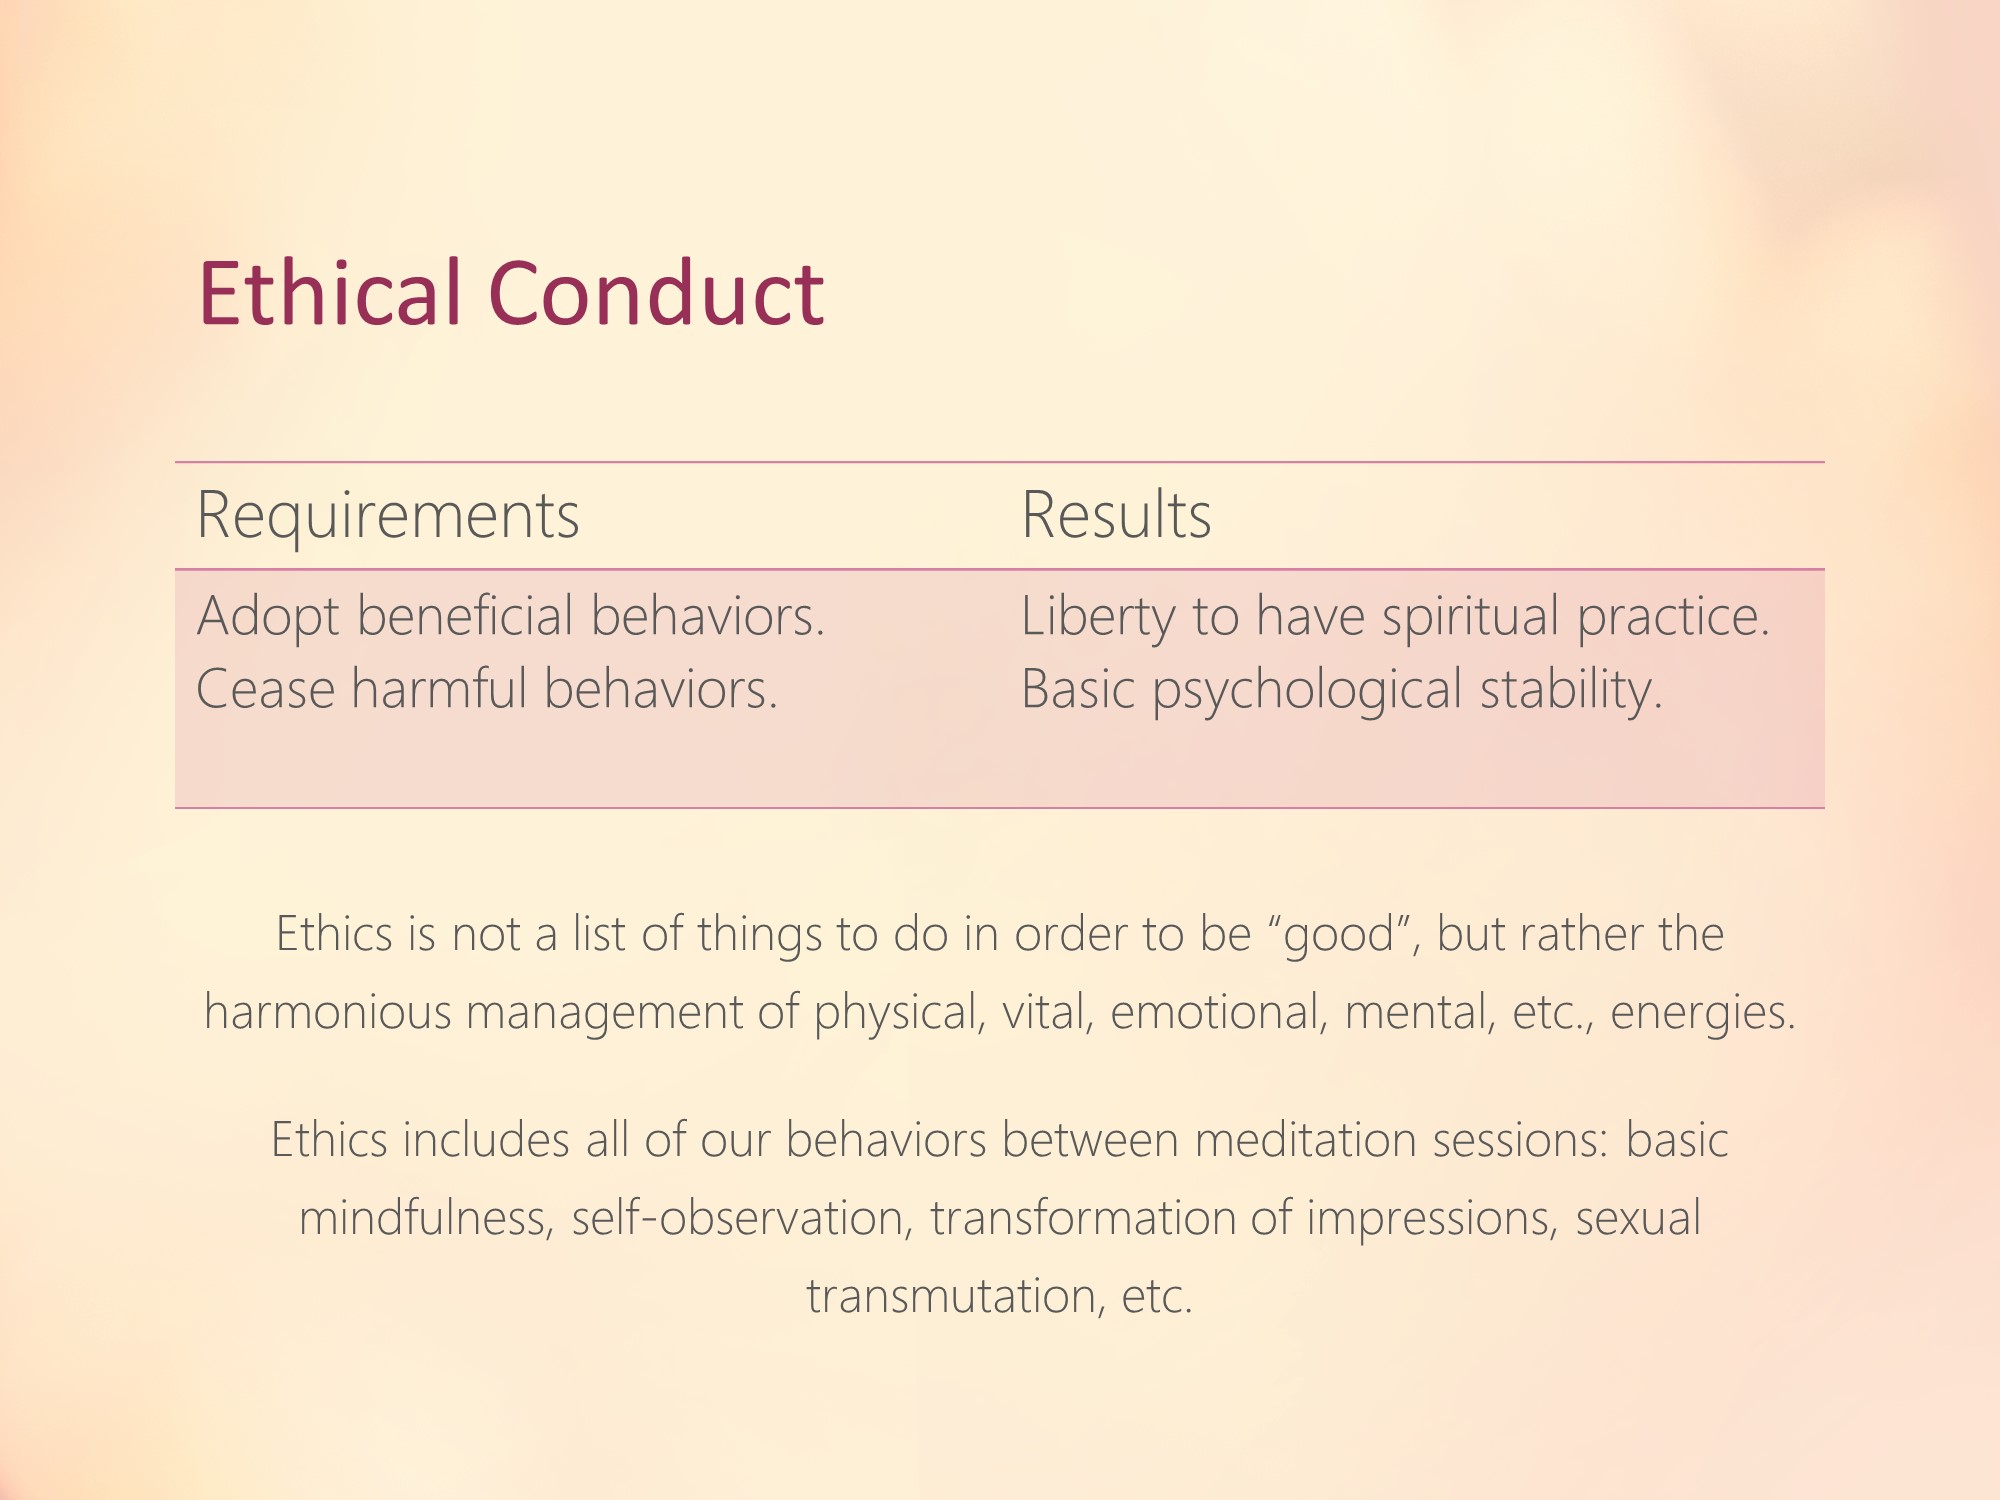 beginning meditation theory practice slide 006 ethical conduct